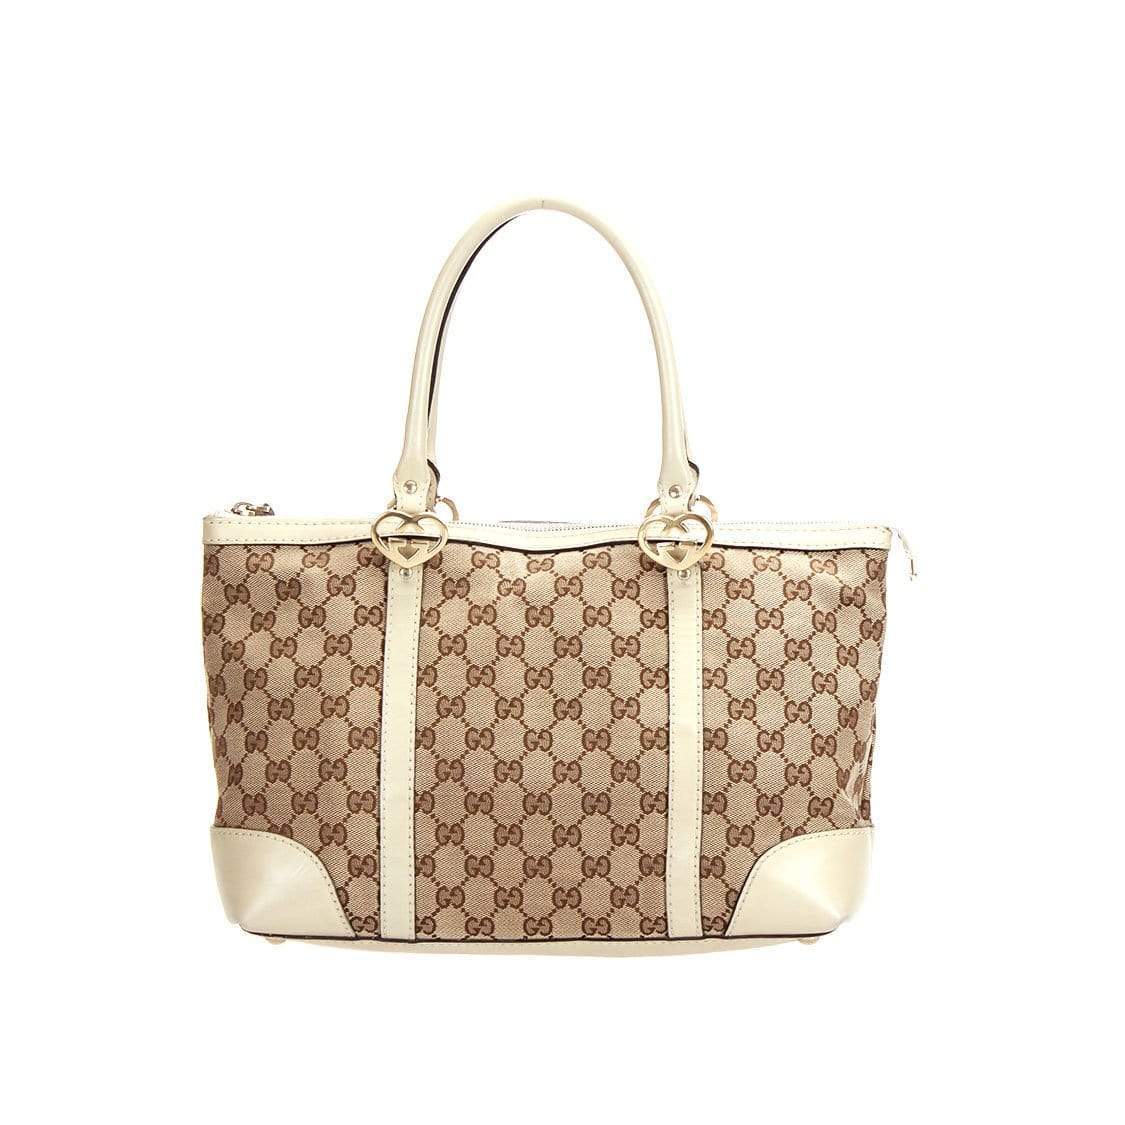 Gucci Gucci GG Canvas Lovely Heart Tote